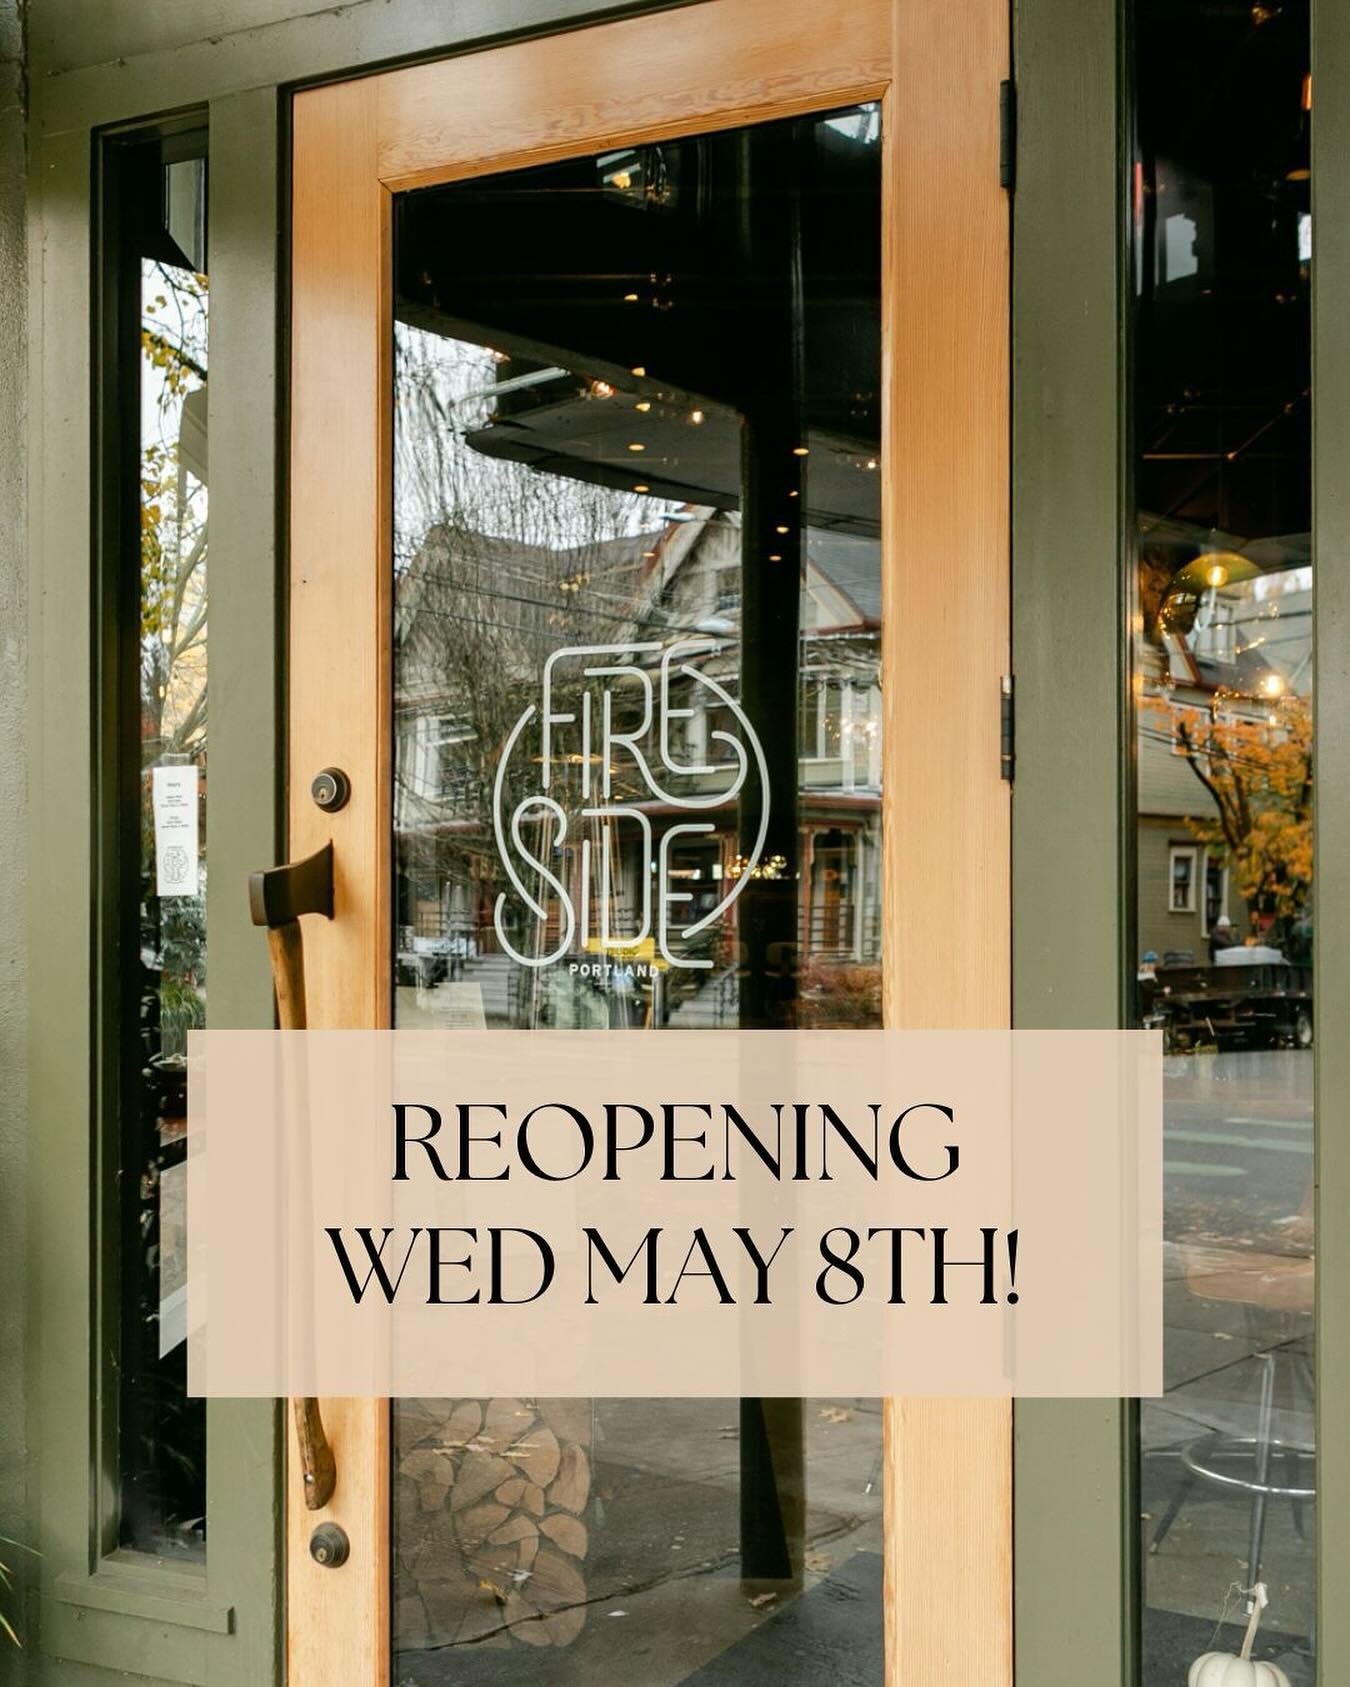 📣 We&rsquo;re open again starting tomorrow, Wed 5/8!

Along with a newly renovated kitchen we&rsquo;re excited to open up with new menu items and cocktails. Stay tuned for all of that! 

In the meantime, we can&rsquo;t wait to have you back. We appr